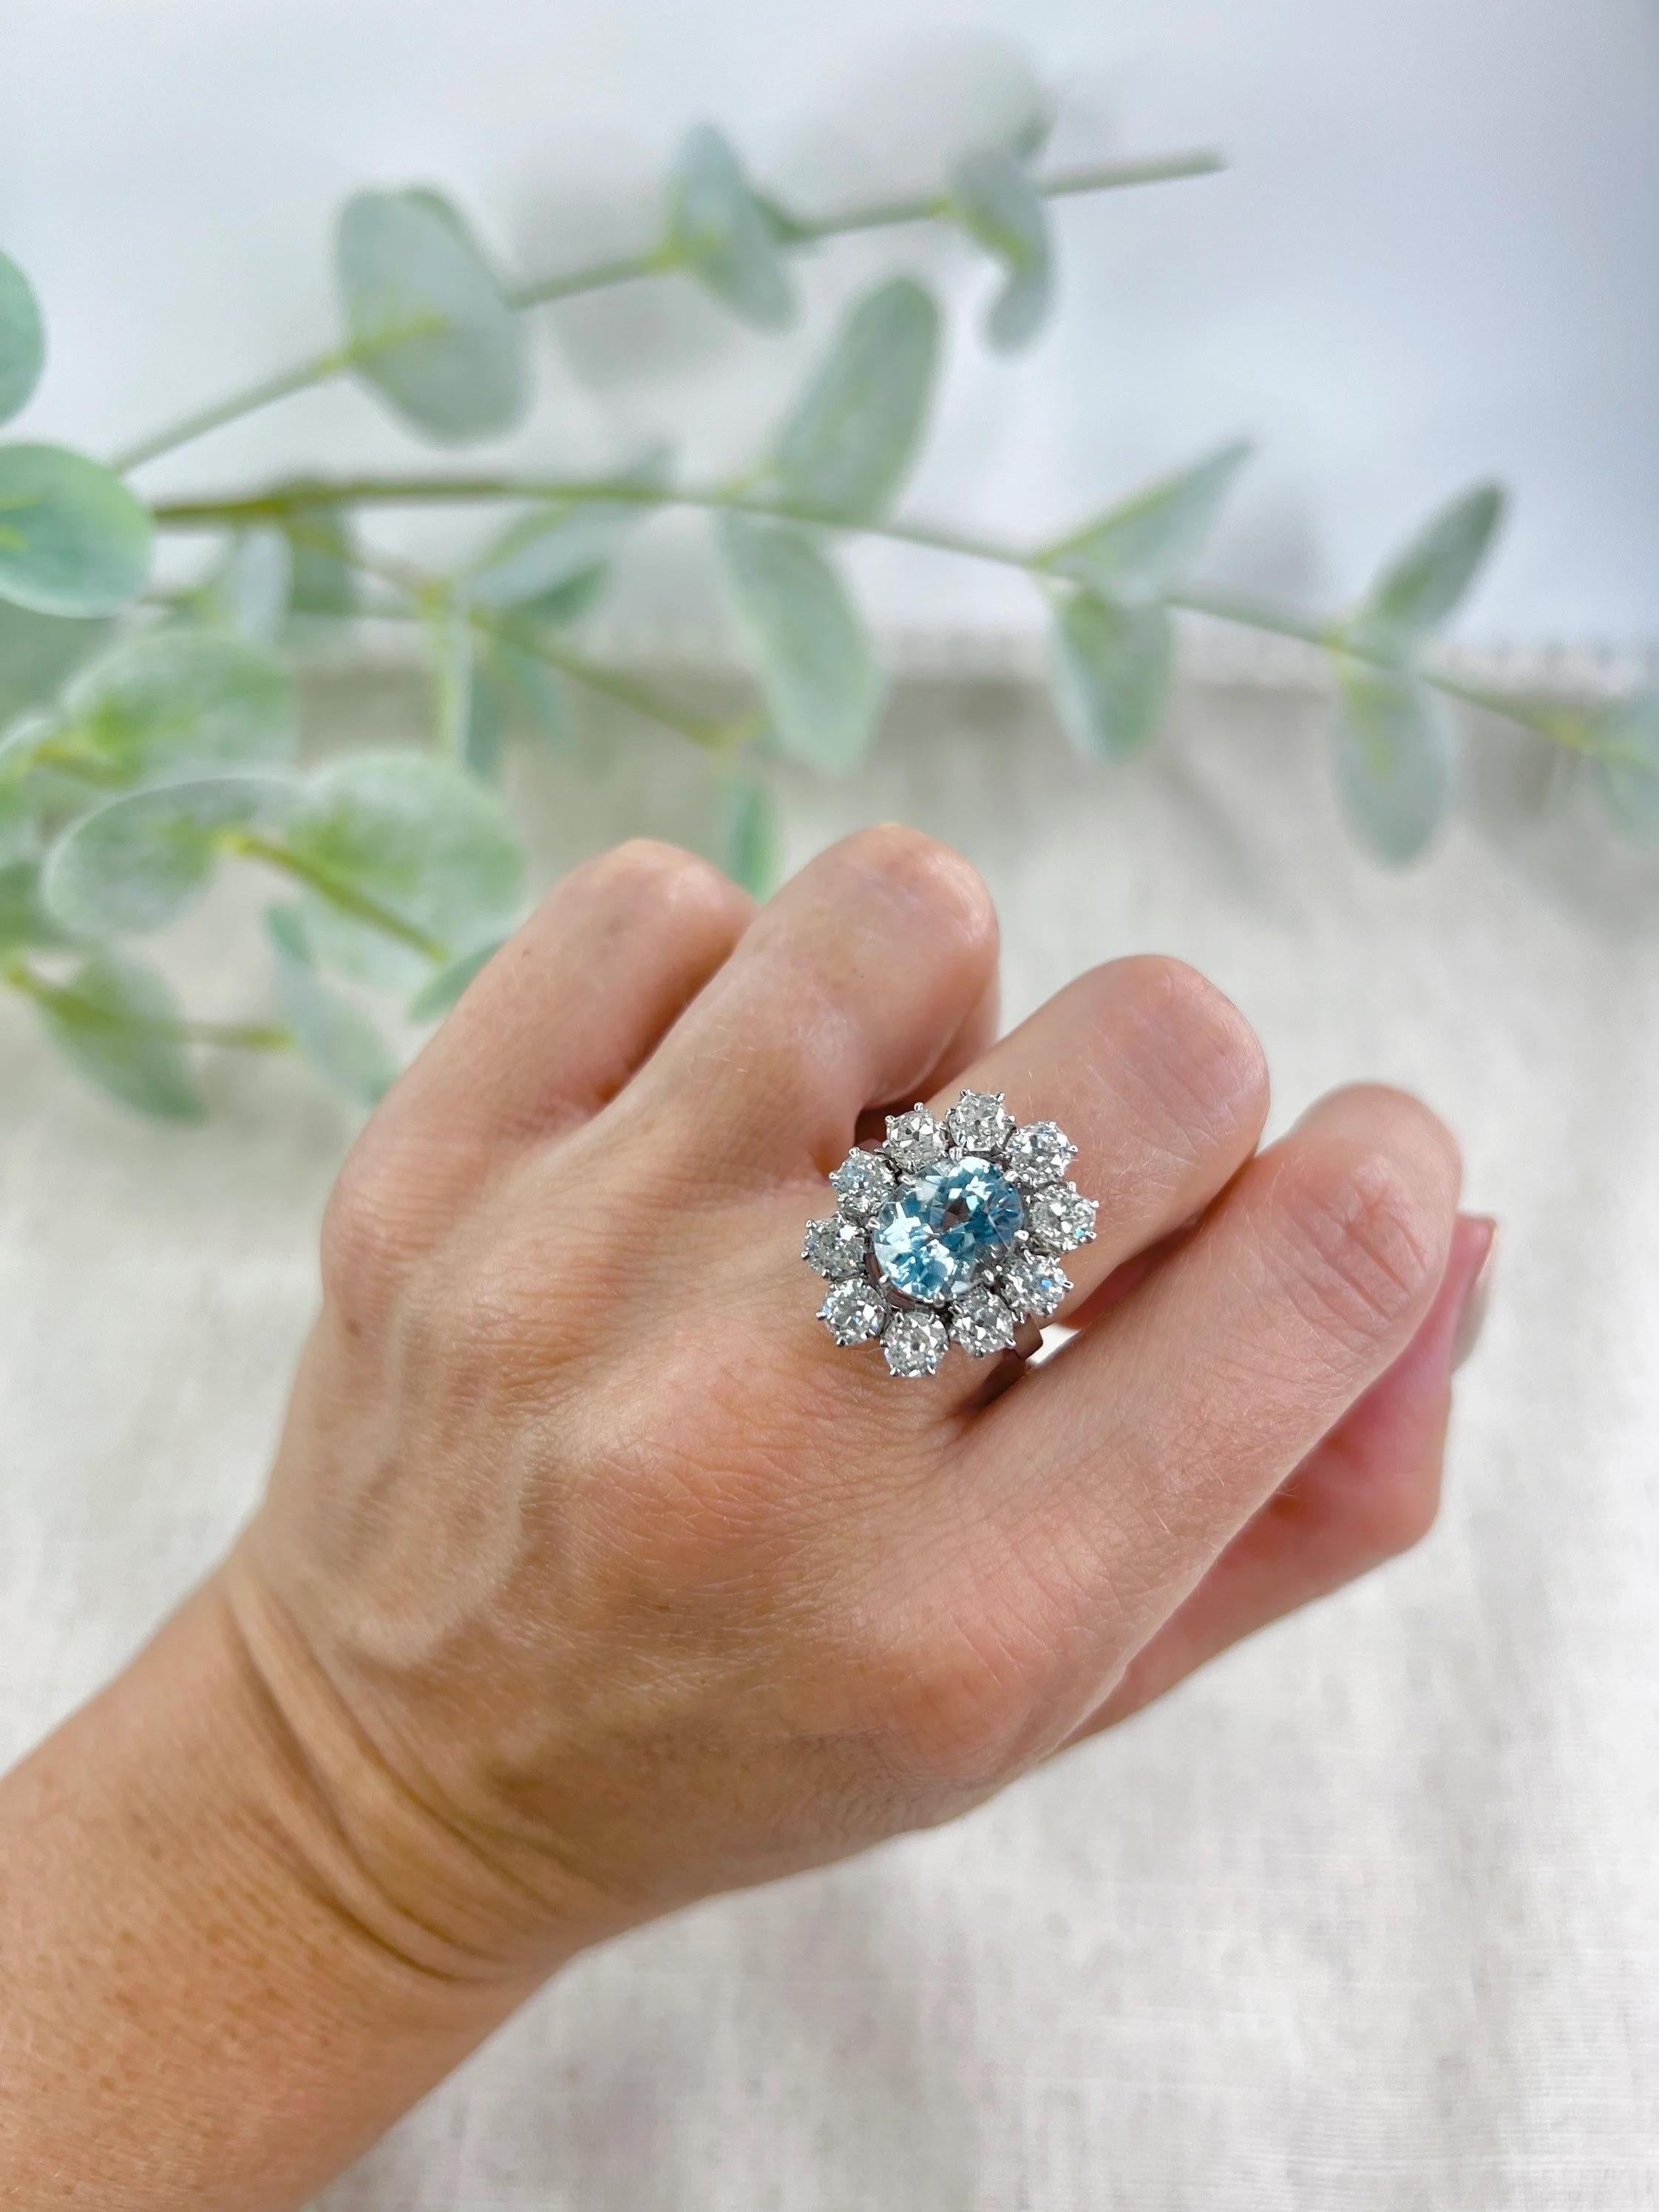 Antique Aquamarine & Diamond Cluster Ring

18ct White Gold- French Stamped 

Circa 1920’s 

Fabulous, French Aquamarine & Diamond Cluster Ring. Set with a Lovely, Natural- Oval Aquamarine Centre Stone & Over 3.0cts of Old Cut Natural Diamonds.